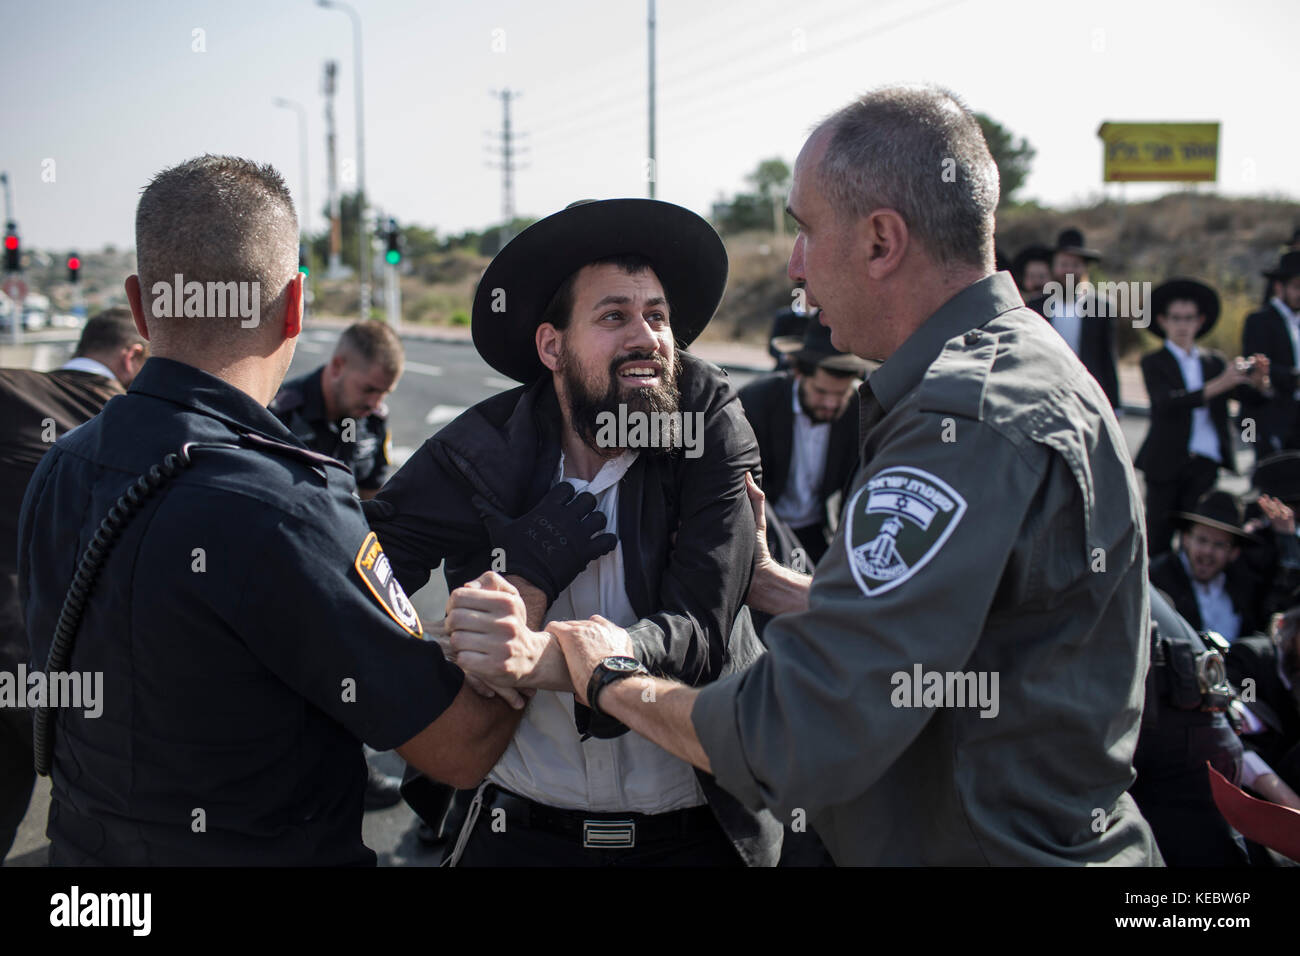 Modiin Israel 19th Oct 2017 An Ultra Orthodox Jewish Man Is Being Arrested By Israeli Police